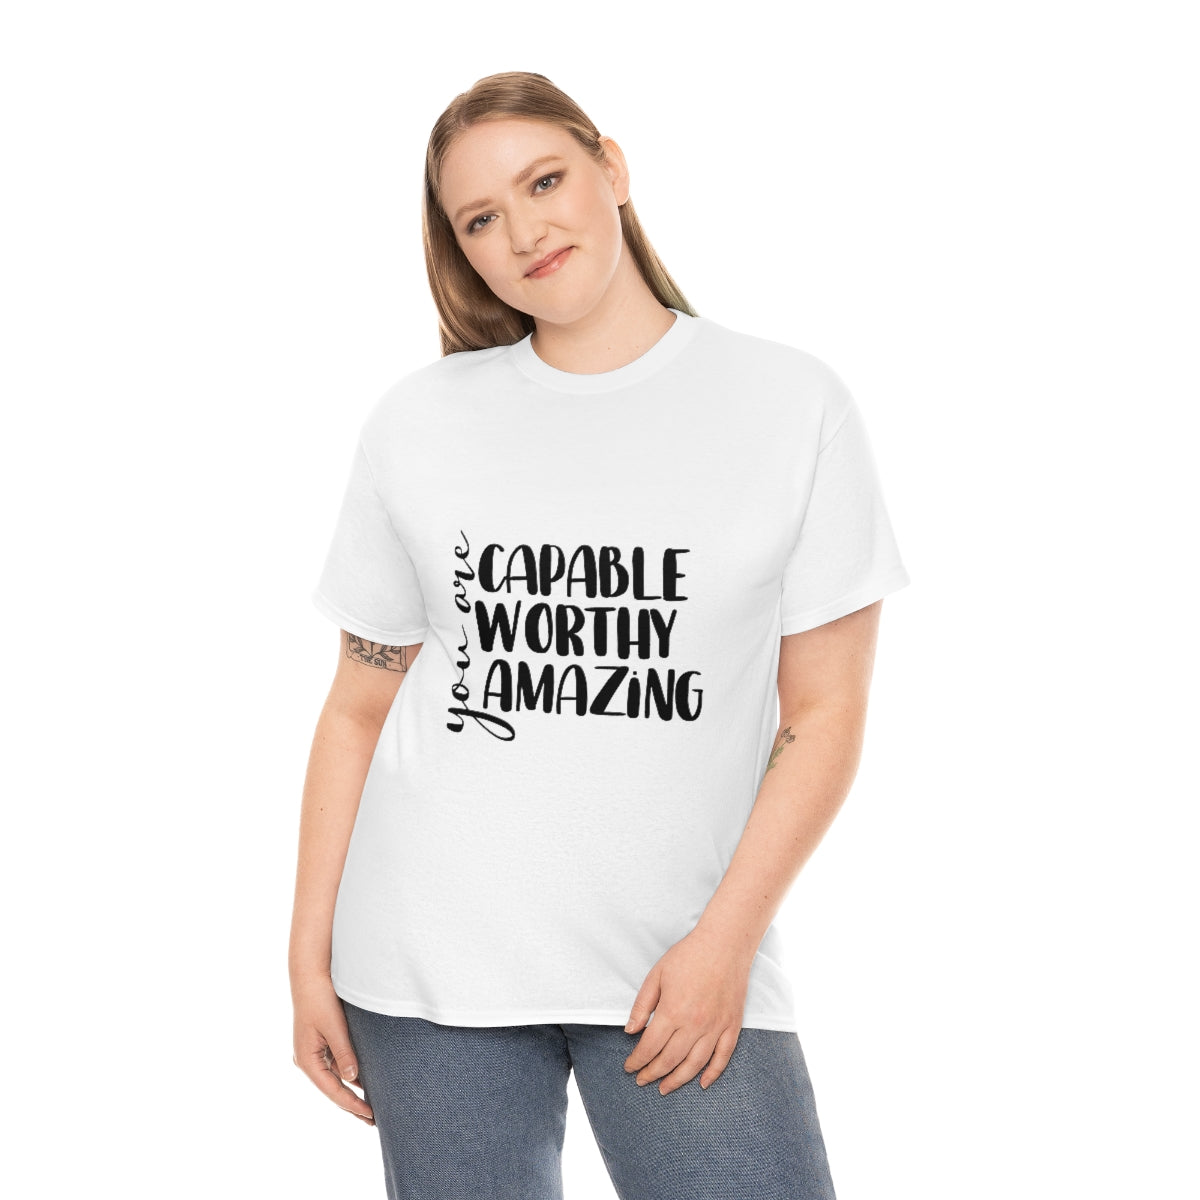 You are Capable worthy and amazing Unisex Heavy Cotton Tee